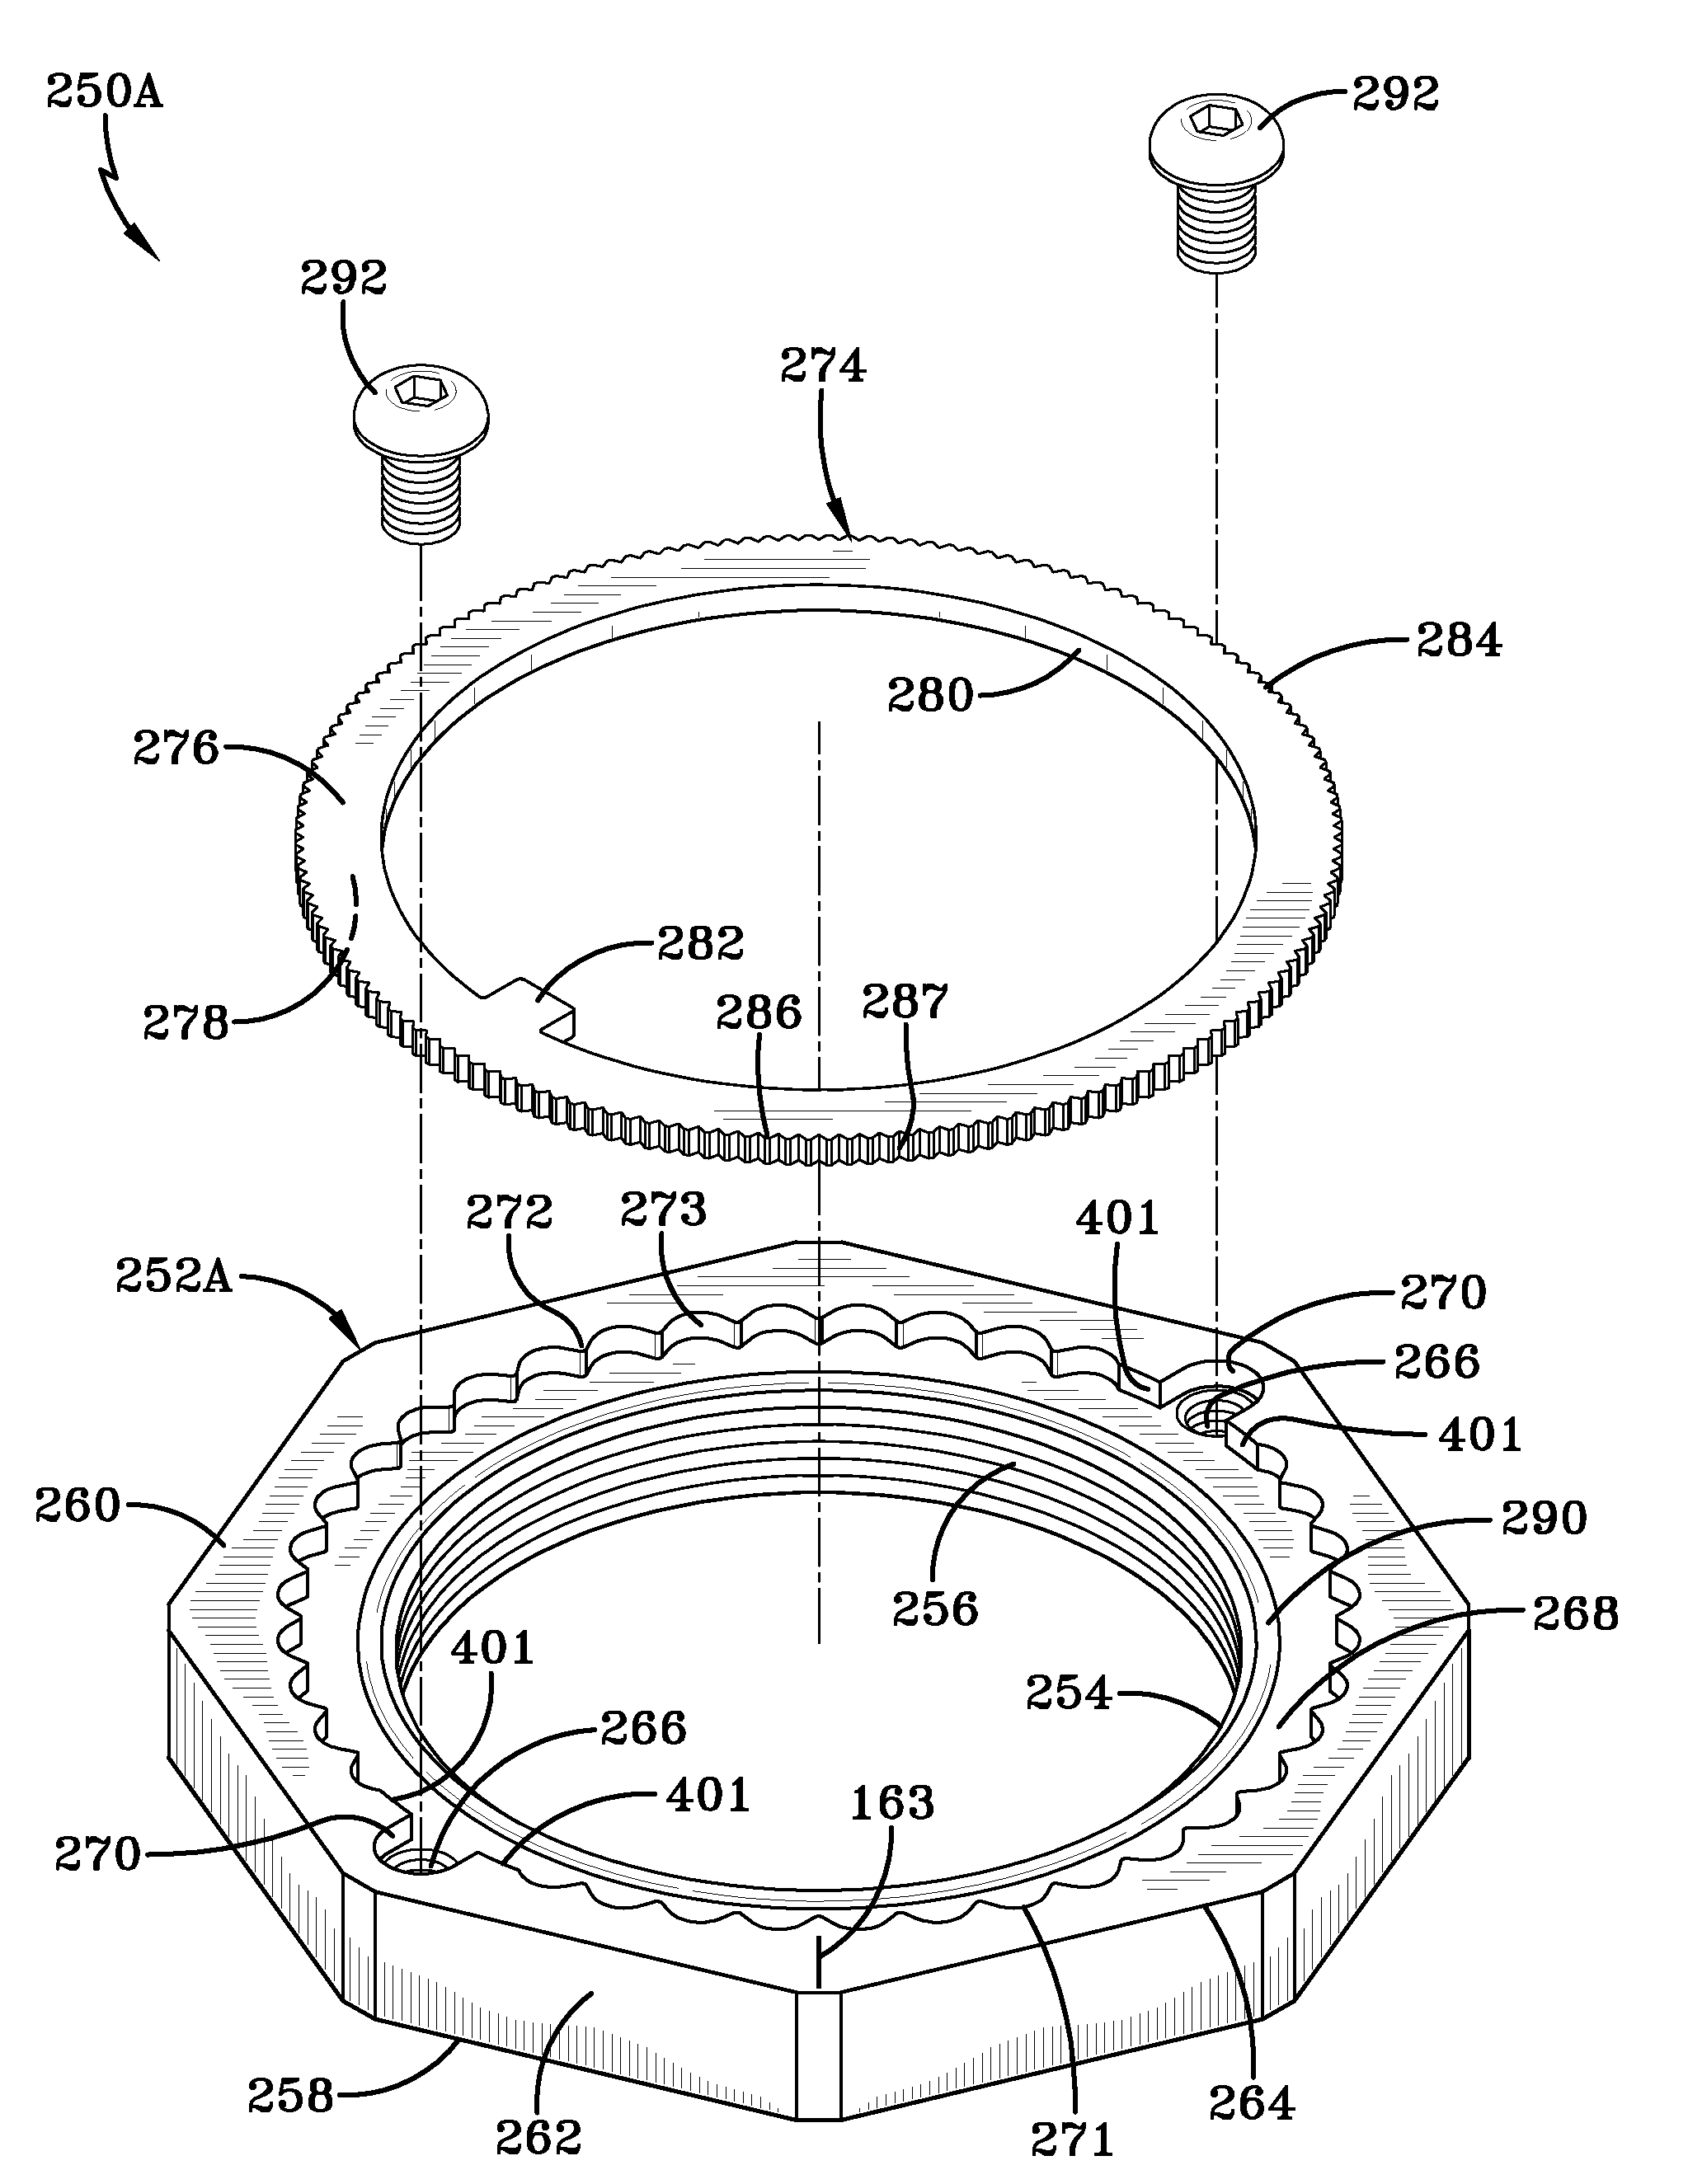 Axle spindle nut assembly for heavy-duty vehicles